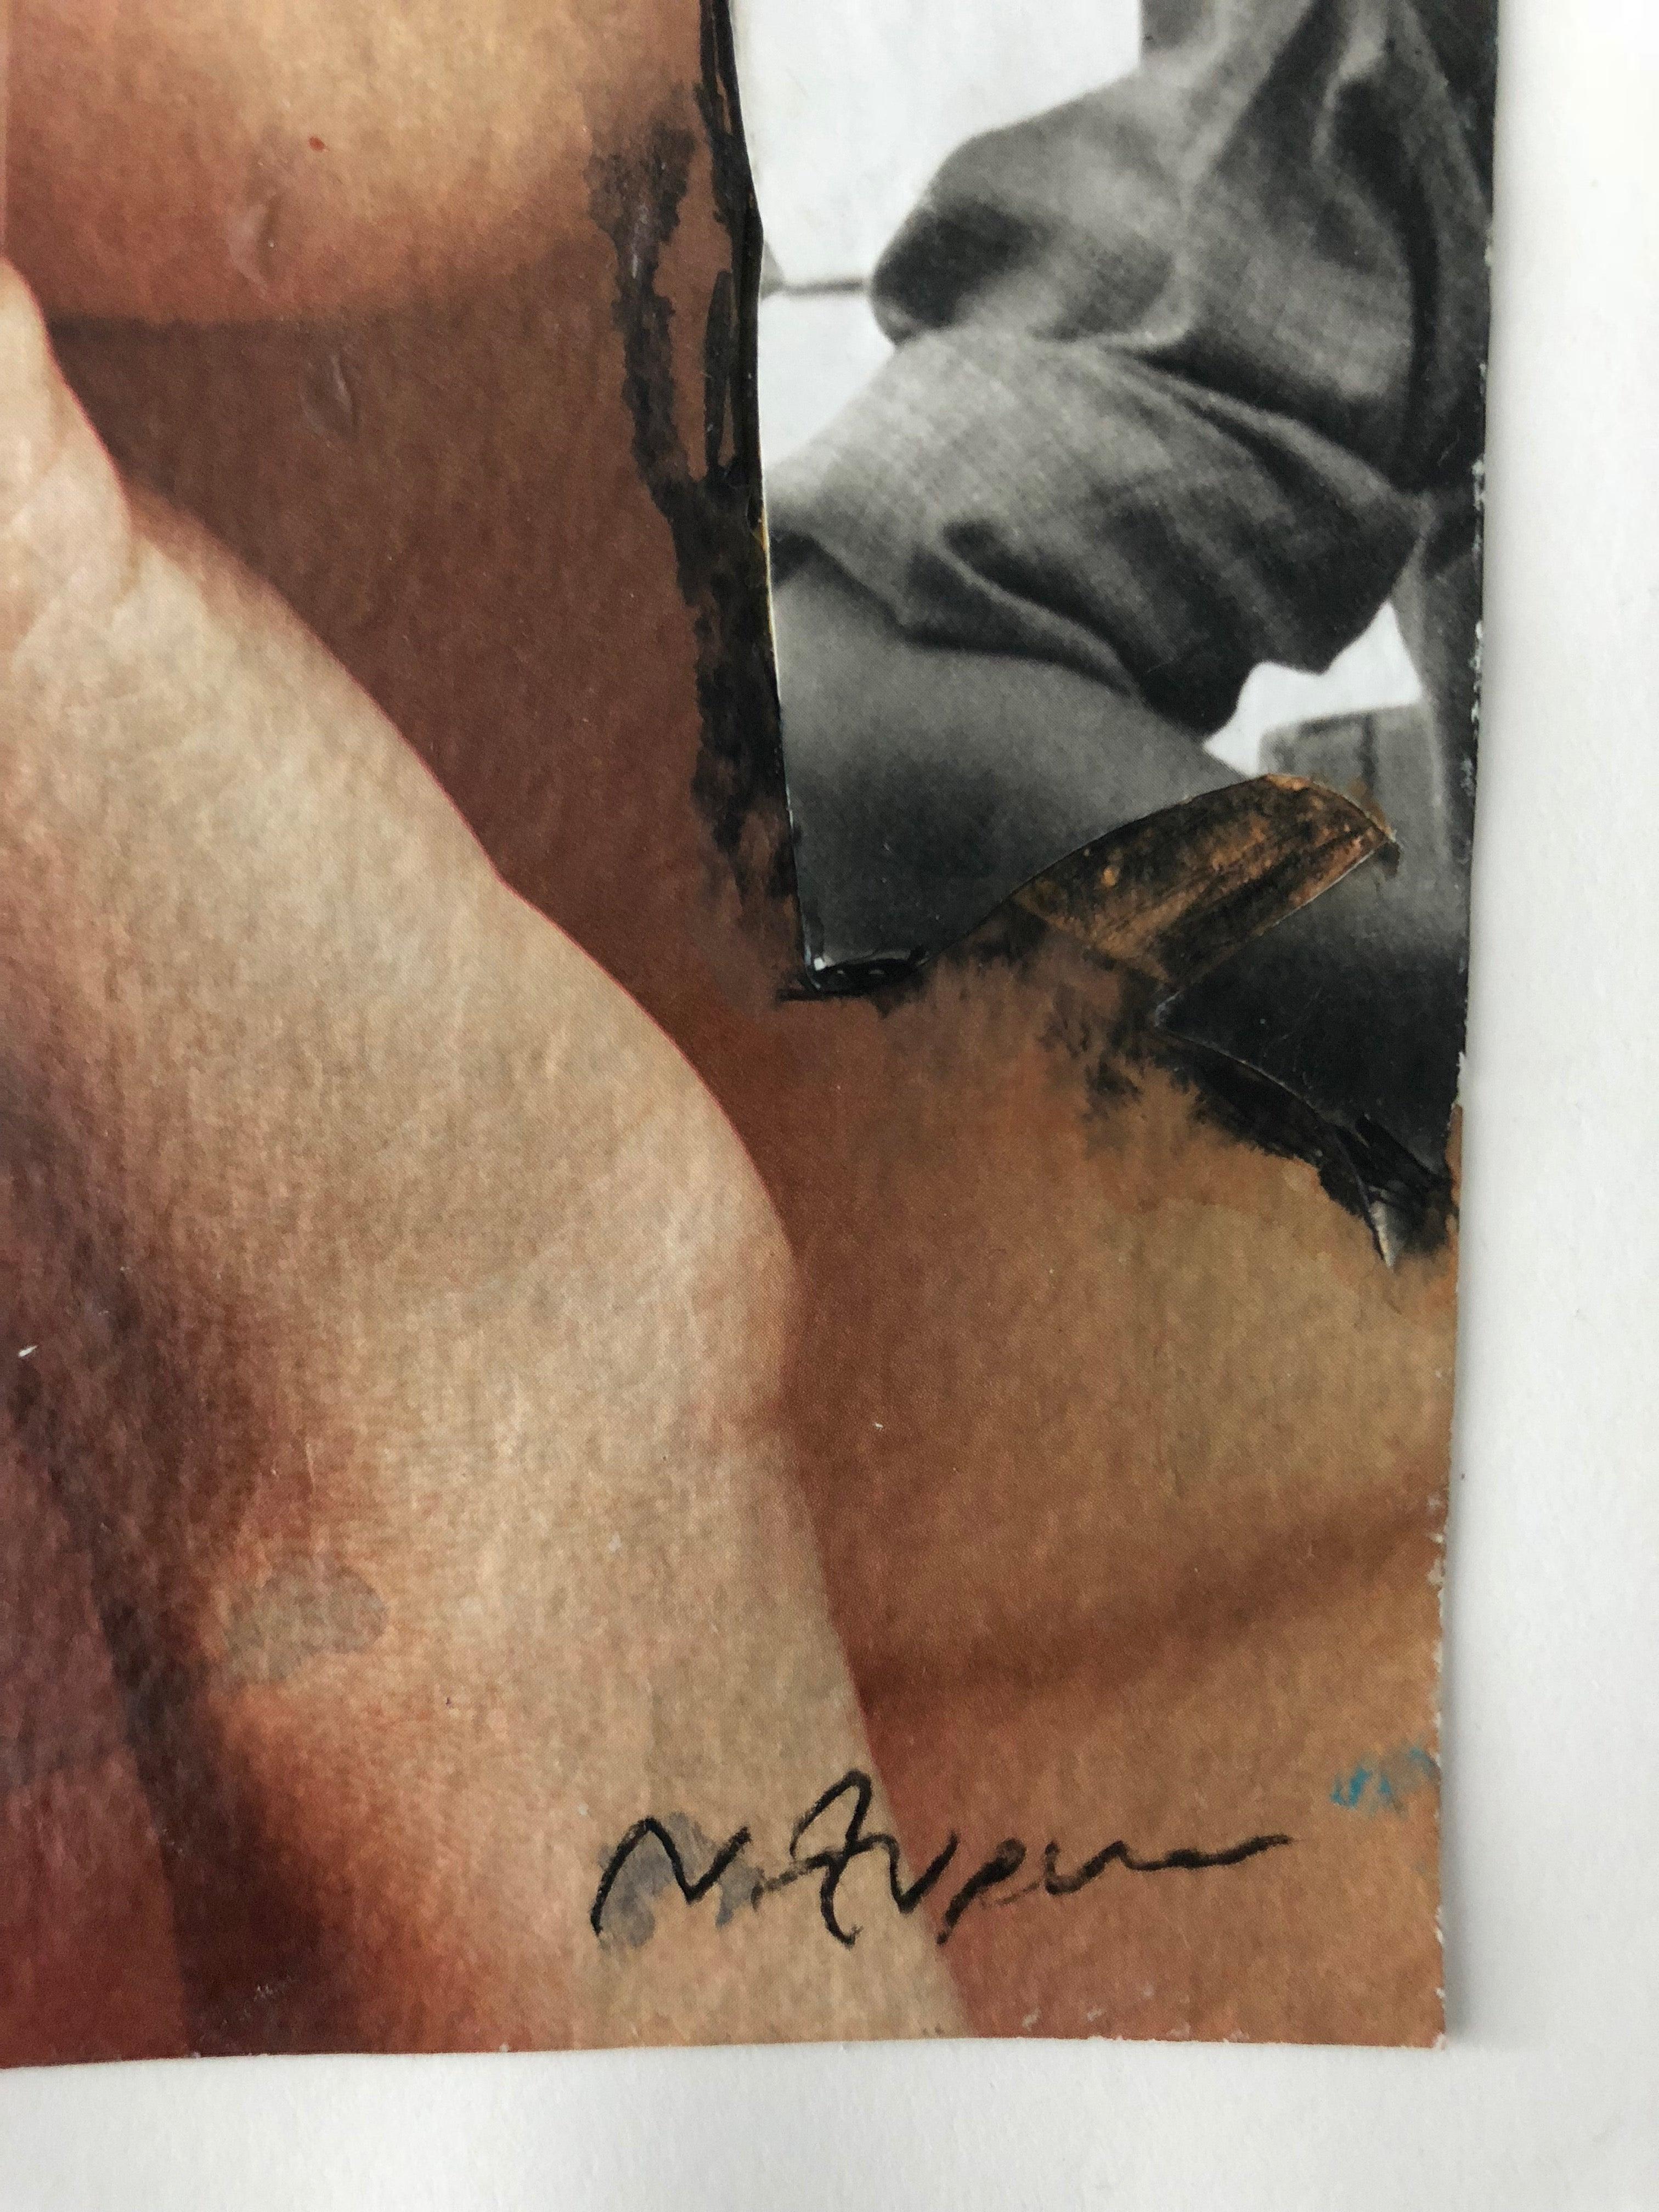 Cocteau Rings, #2271 by Natasha Zupan
Collage on Paper
Measures: 12.2 in. H x 9.1 in. W
One of a kind
Signed lower right on recto by the artist
2018

Natasha Zupan's body of work, 'Homage to Horst P. Horst', explores the manipulation of surface